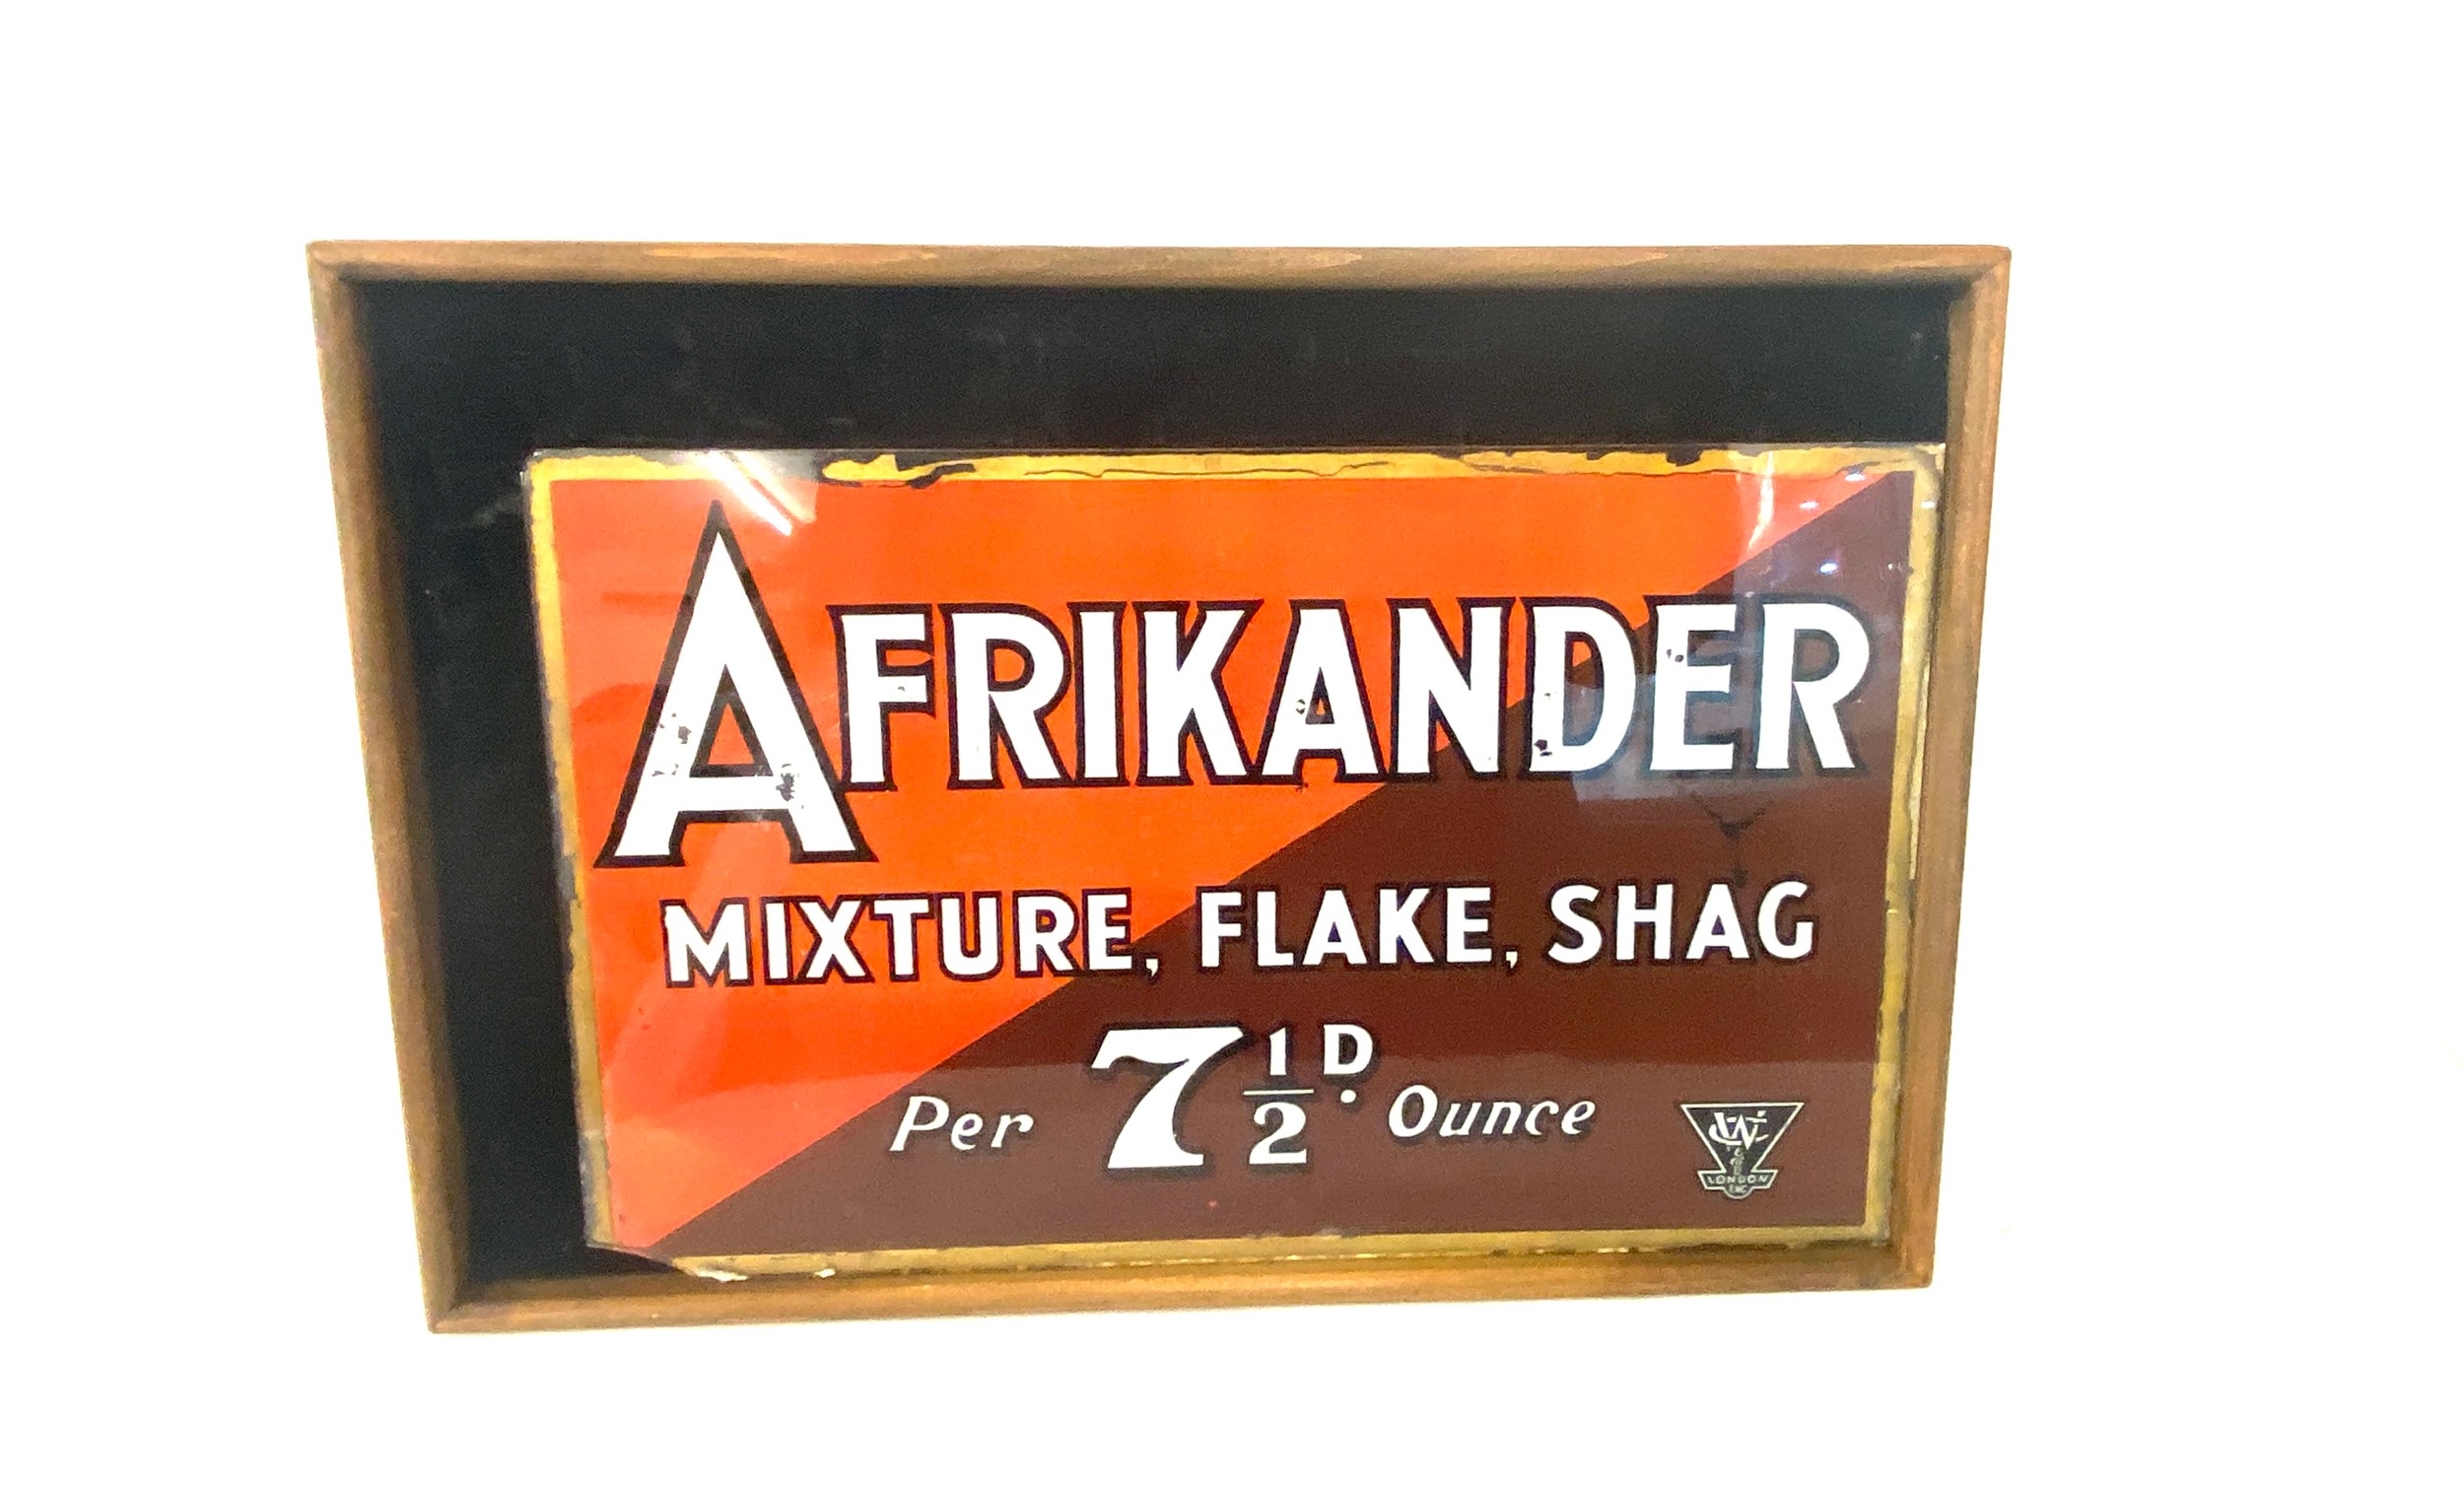 Vintage Afrikander mixture, flake, shag sign measures approx 14 inches by 10 inches - Image 3 of 3